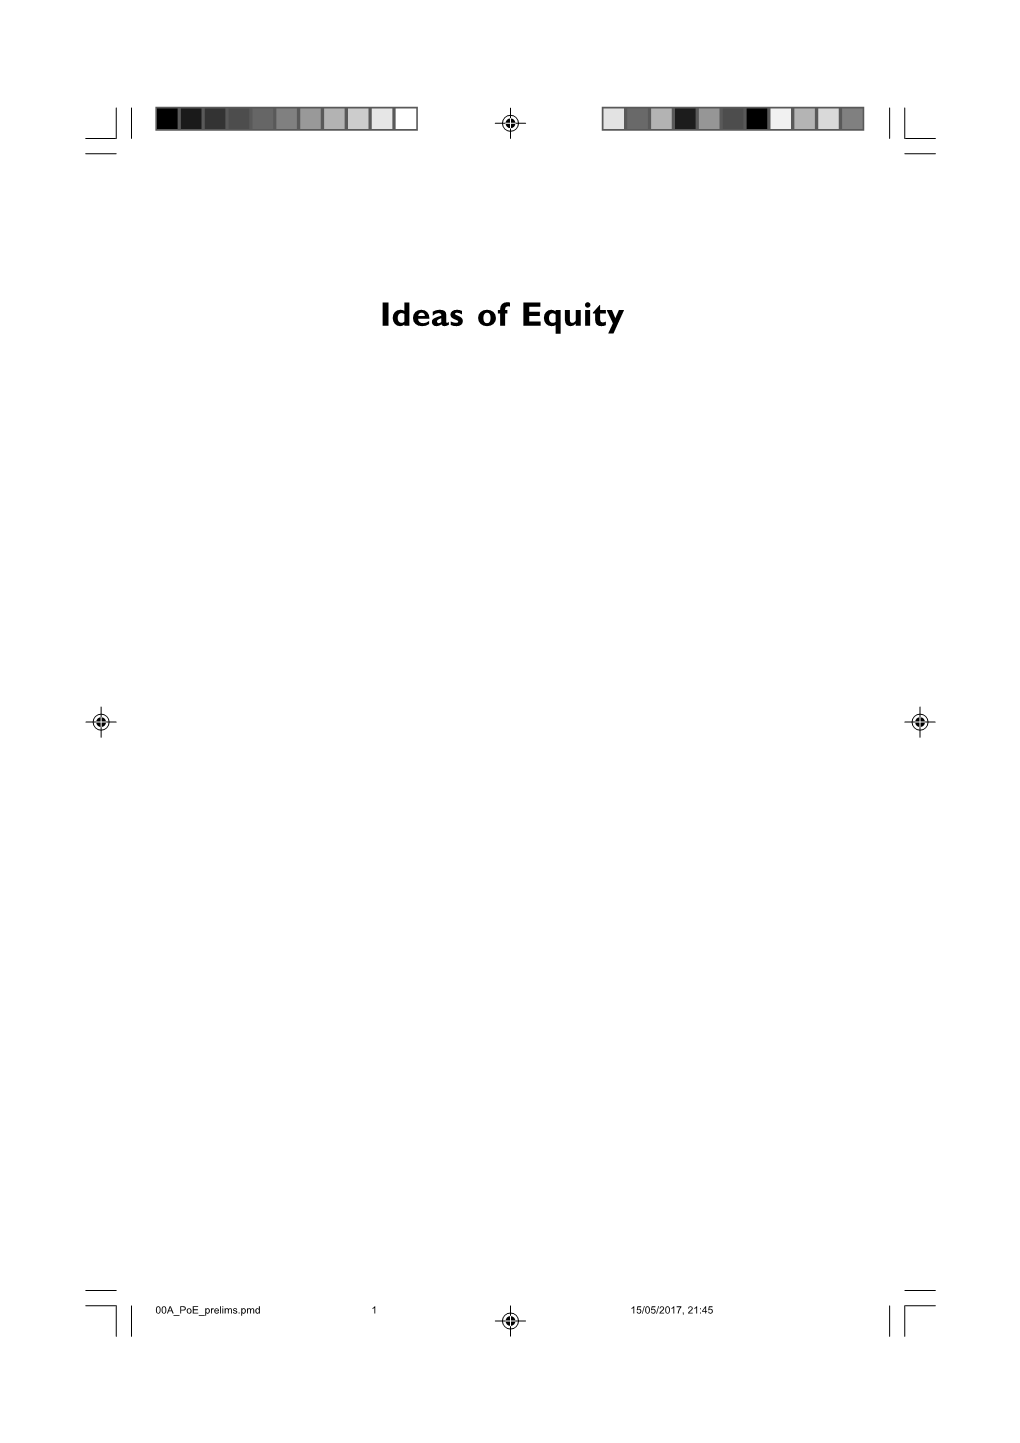 Ideas of Equity (Pdf)